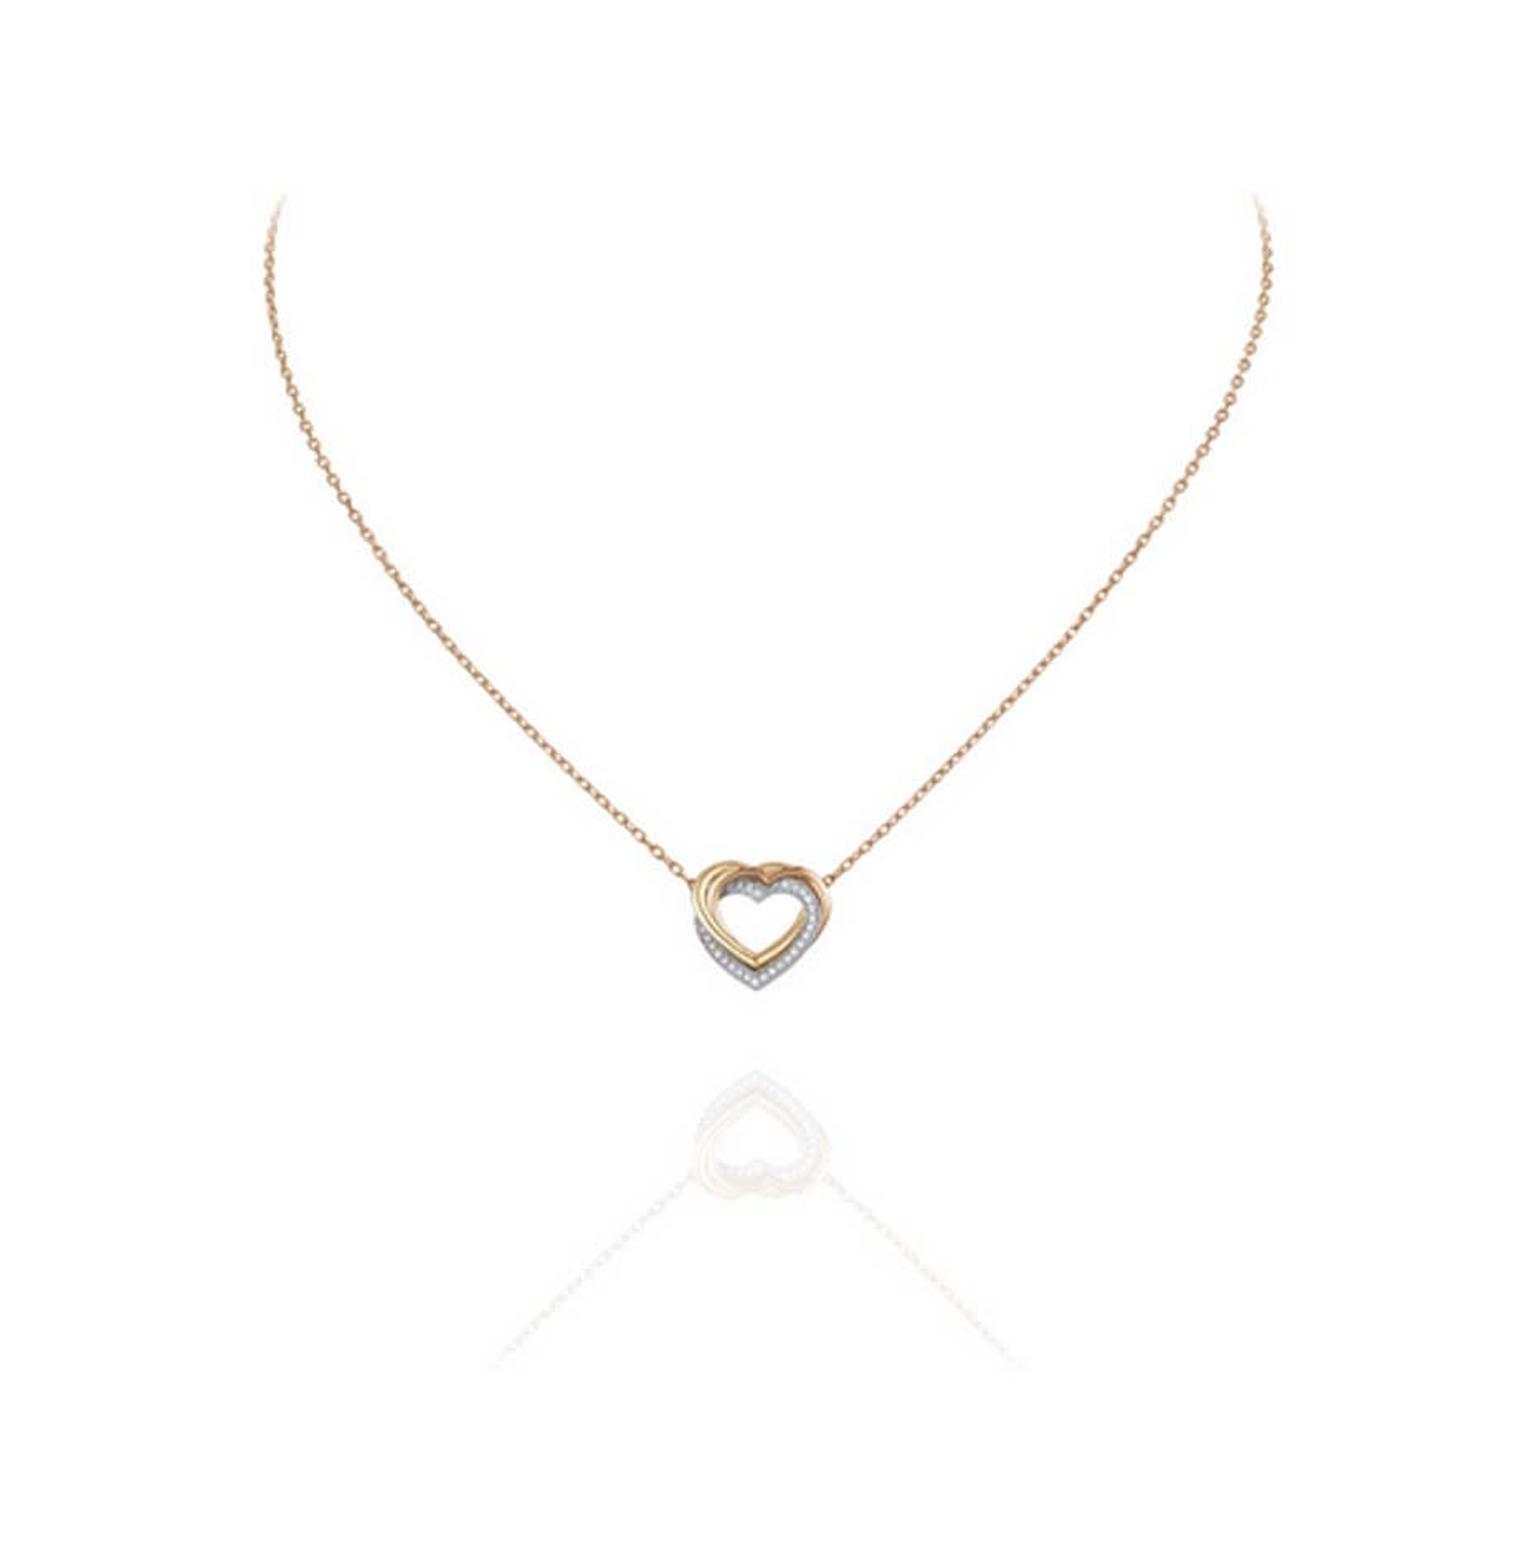 Trinity de Cartier heart necklace in rose, yellow and white gold with diamonds.